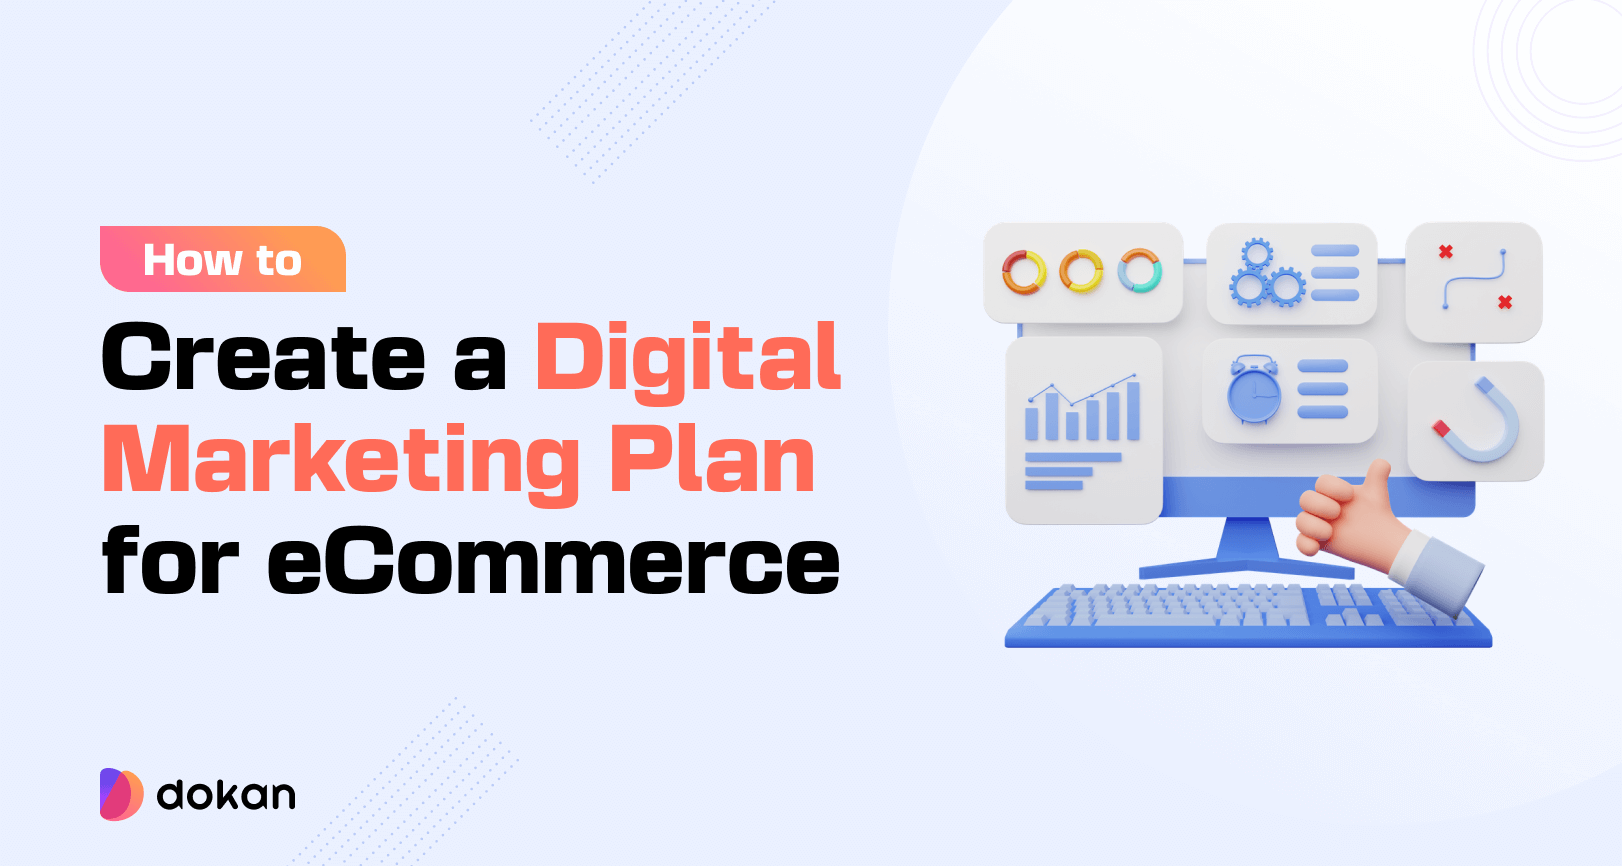 This is the feature image of how to create a digital marketing plan for eCommerce